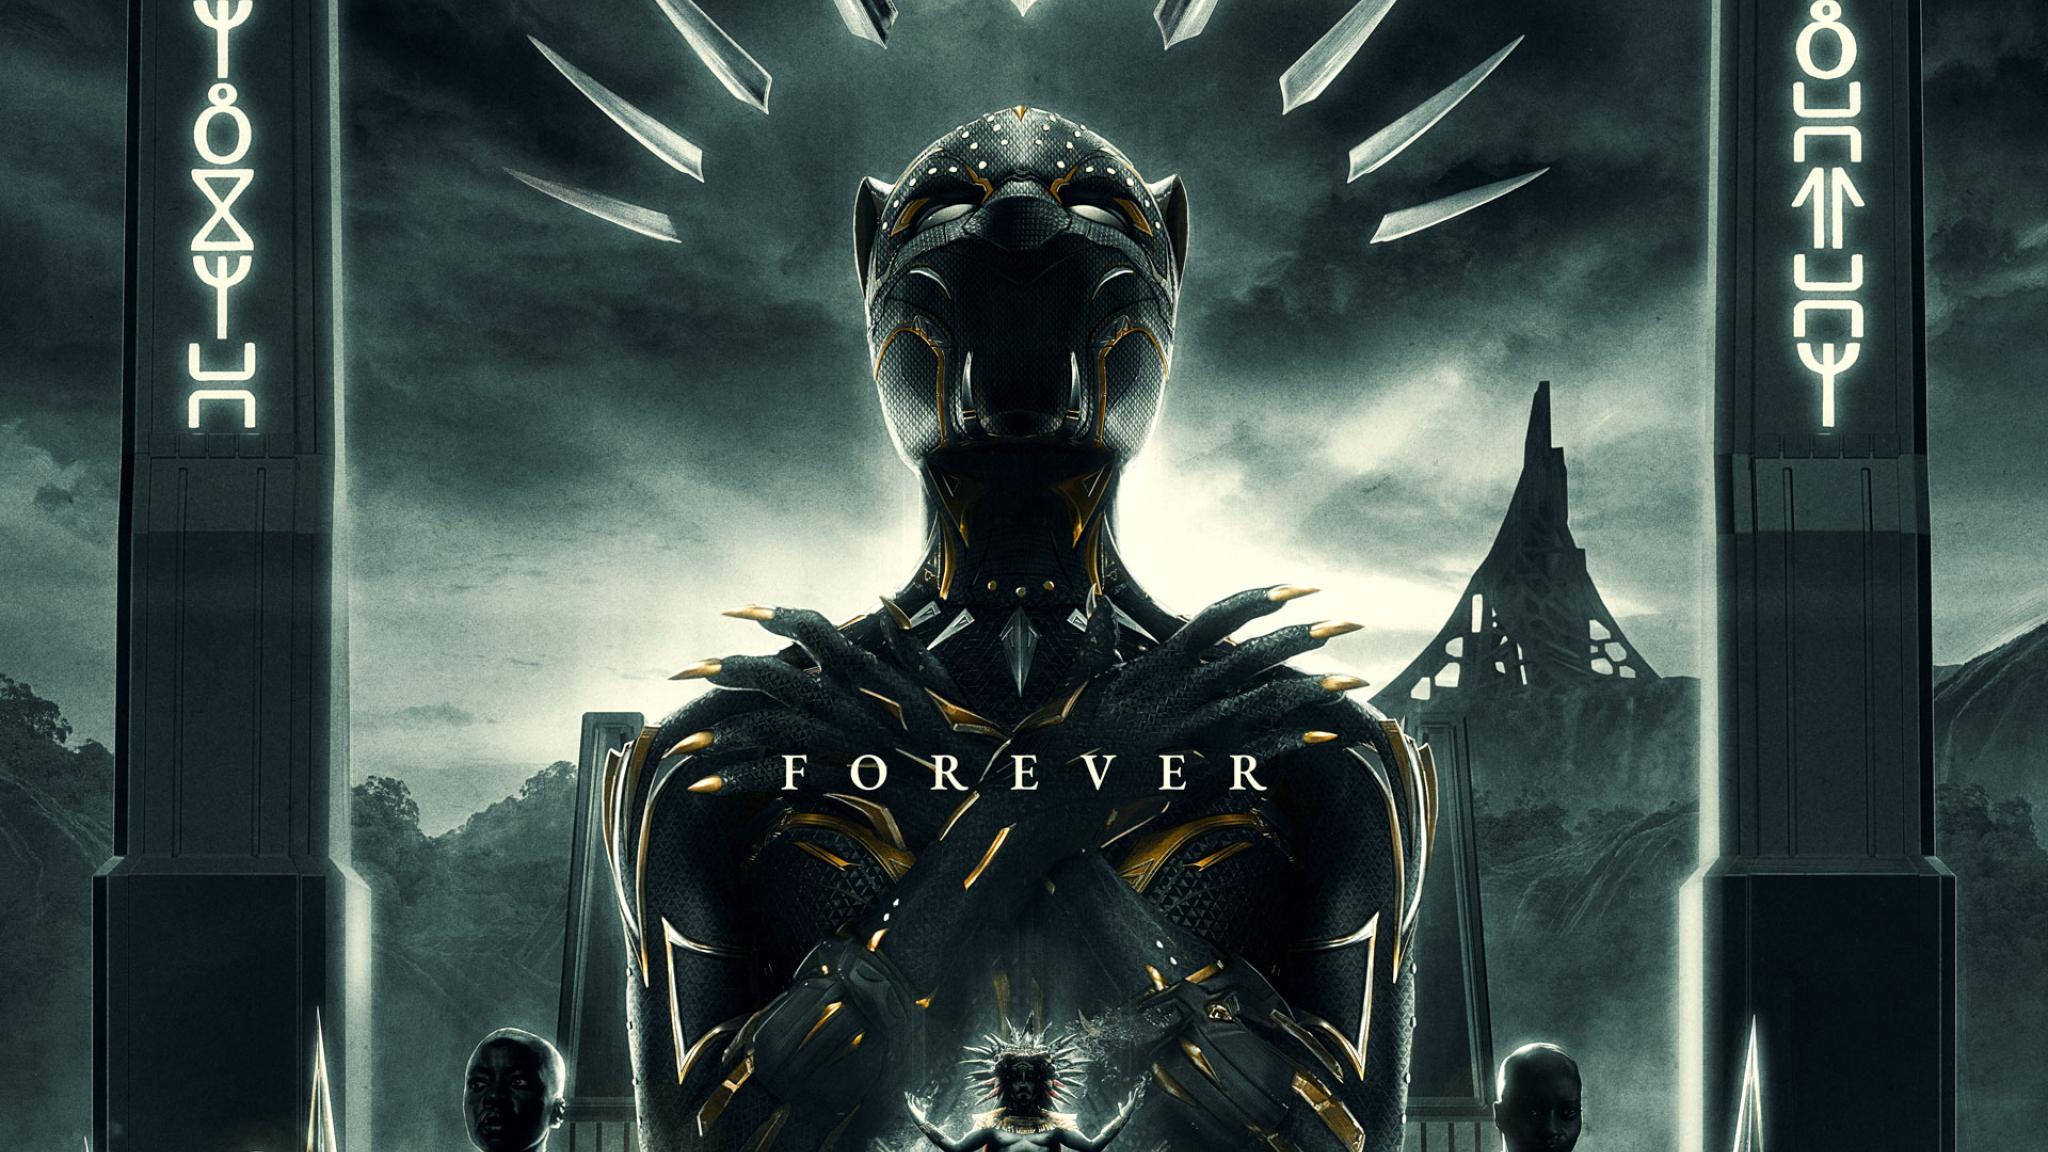 2048x1152 Black Panther Wakanda Forever Hd Poster 2048x1152 Resolution